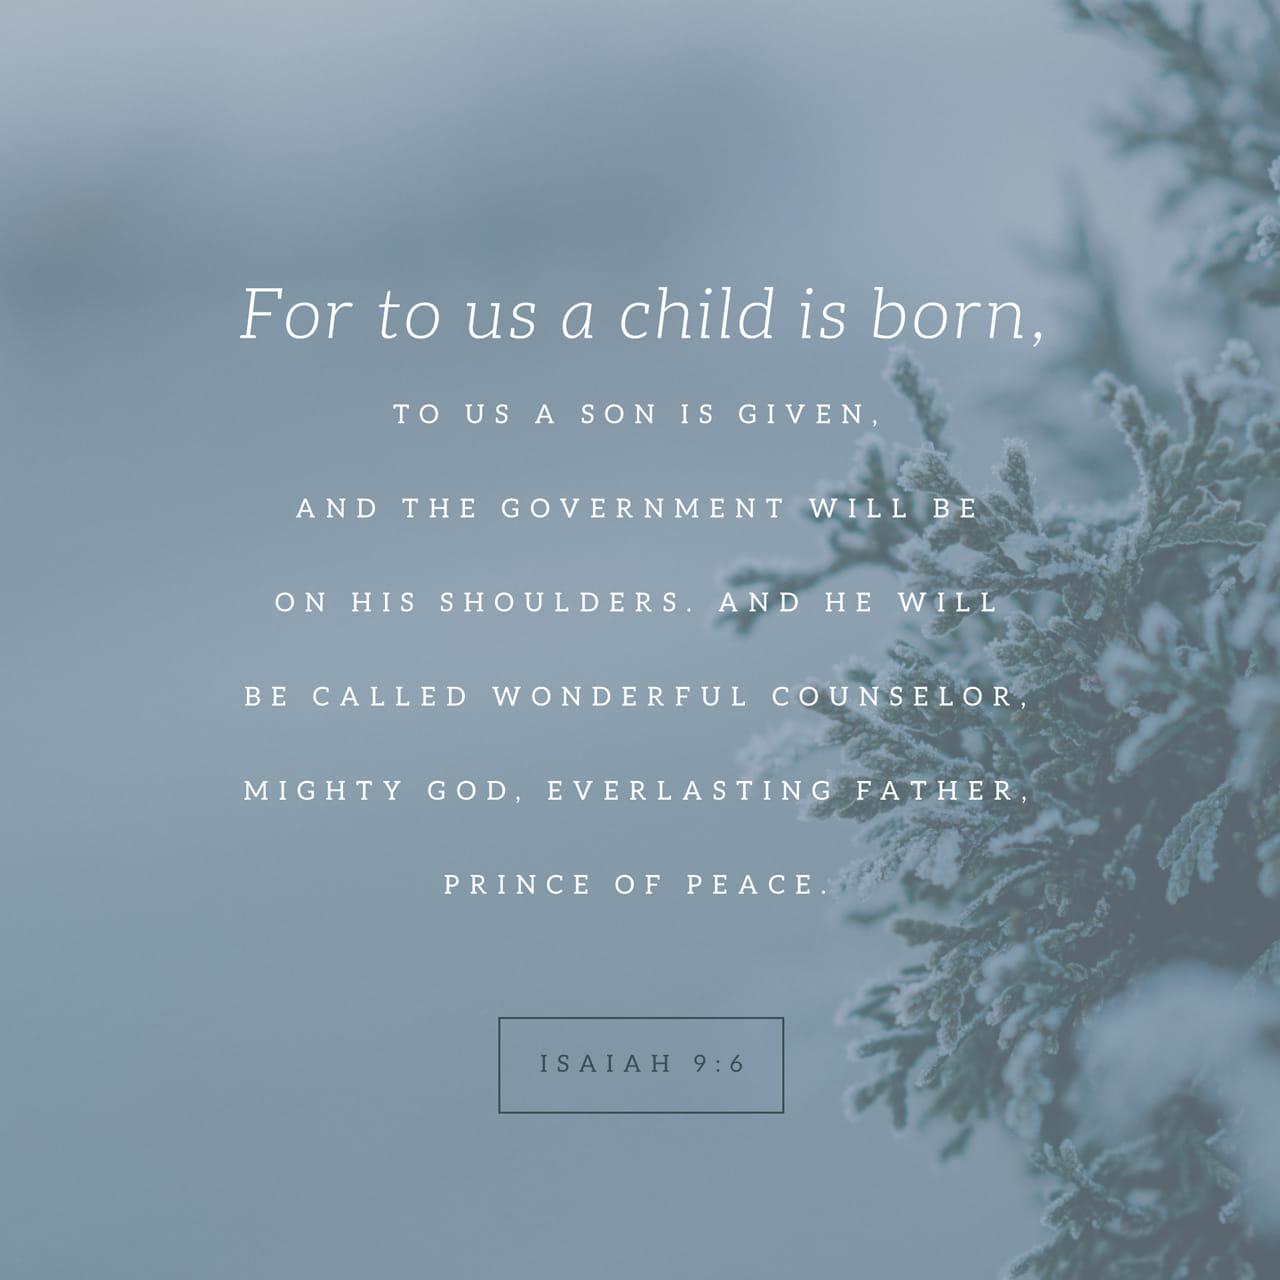 Bible Verse of the Day - day 160 - image 25557 (Isaiah 9:6)